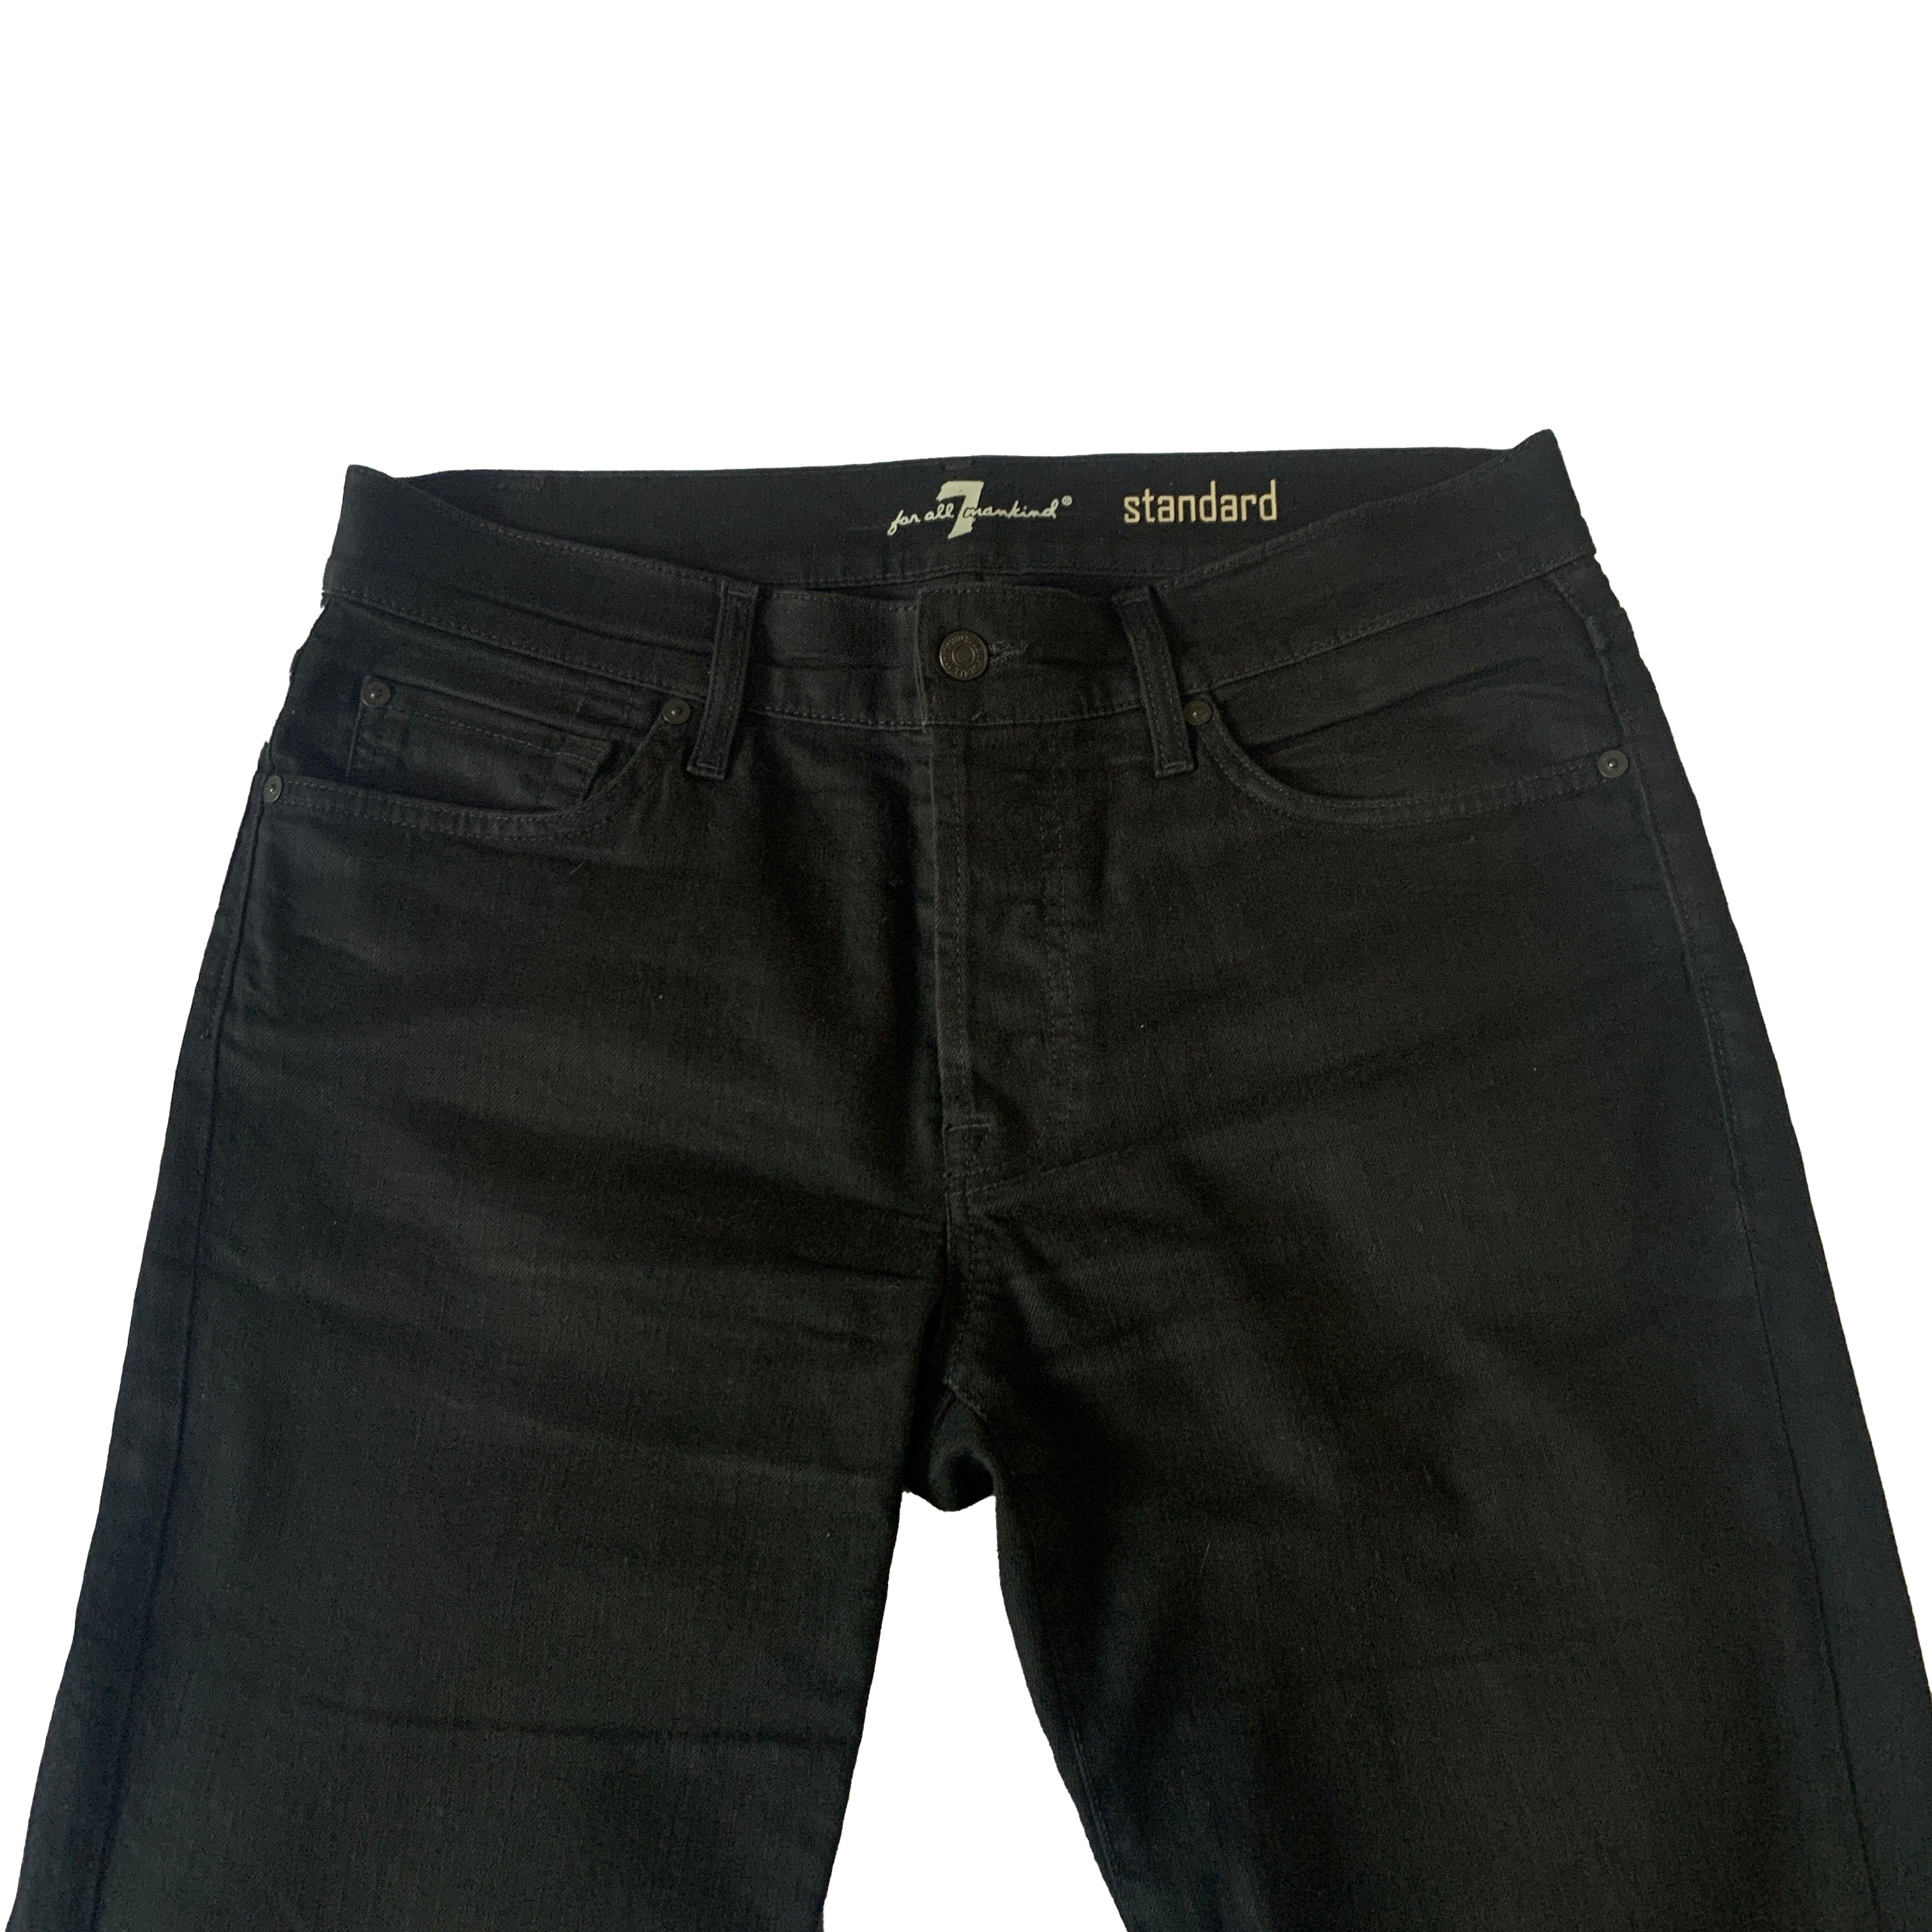 Jean 7 for all mankind